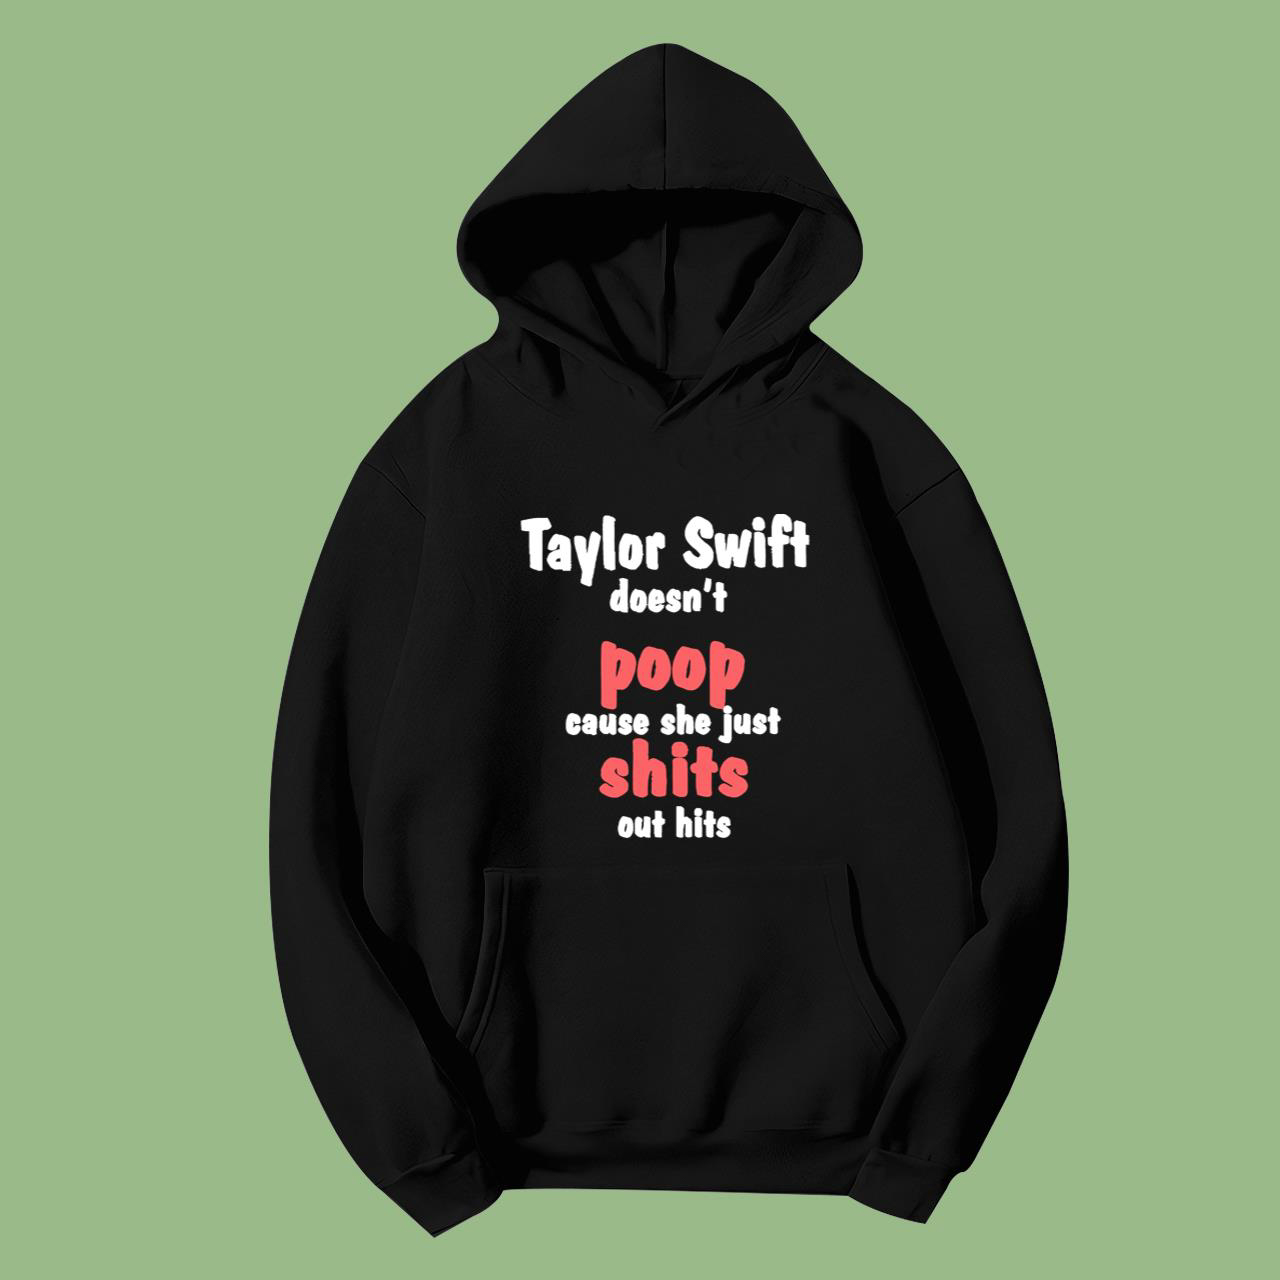 Taylor Swift Doesn’t Poop Cause She Just Shits Out Hits T-Shirt